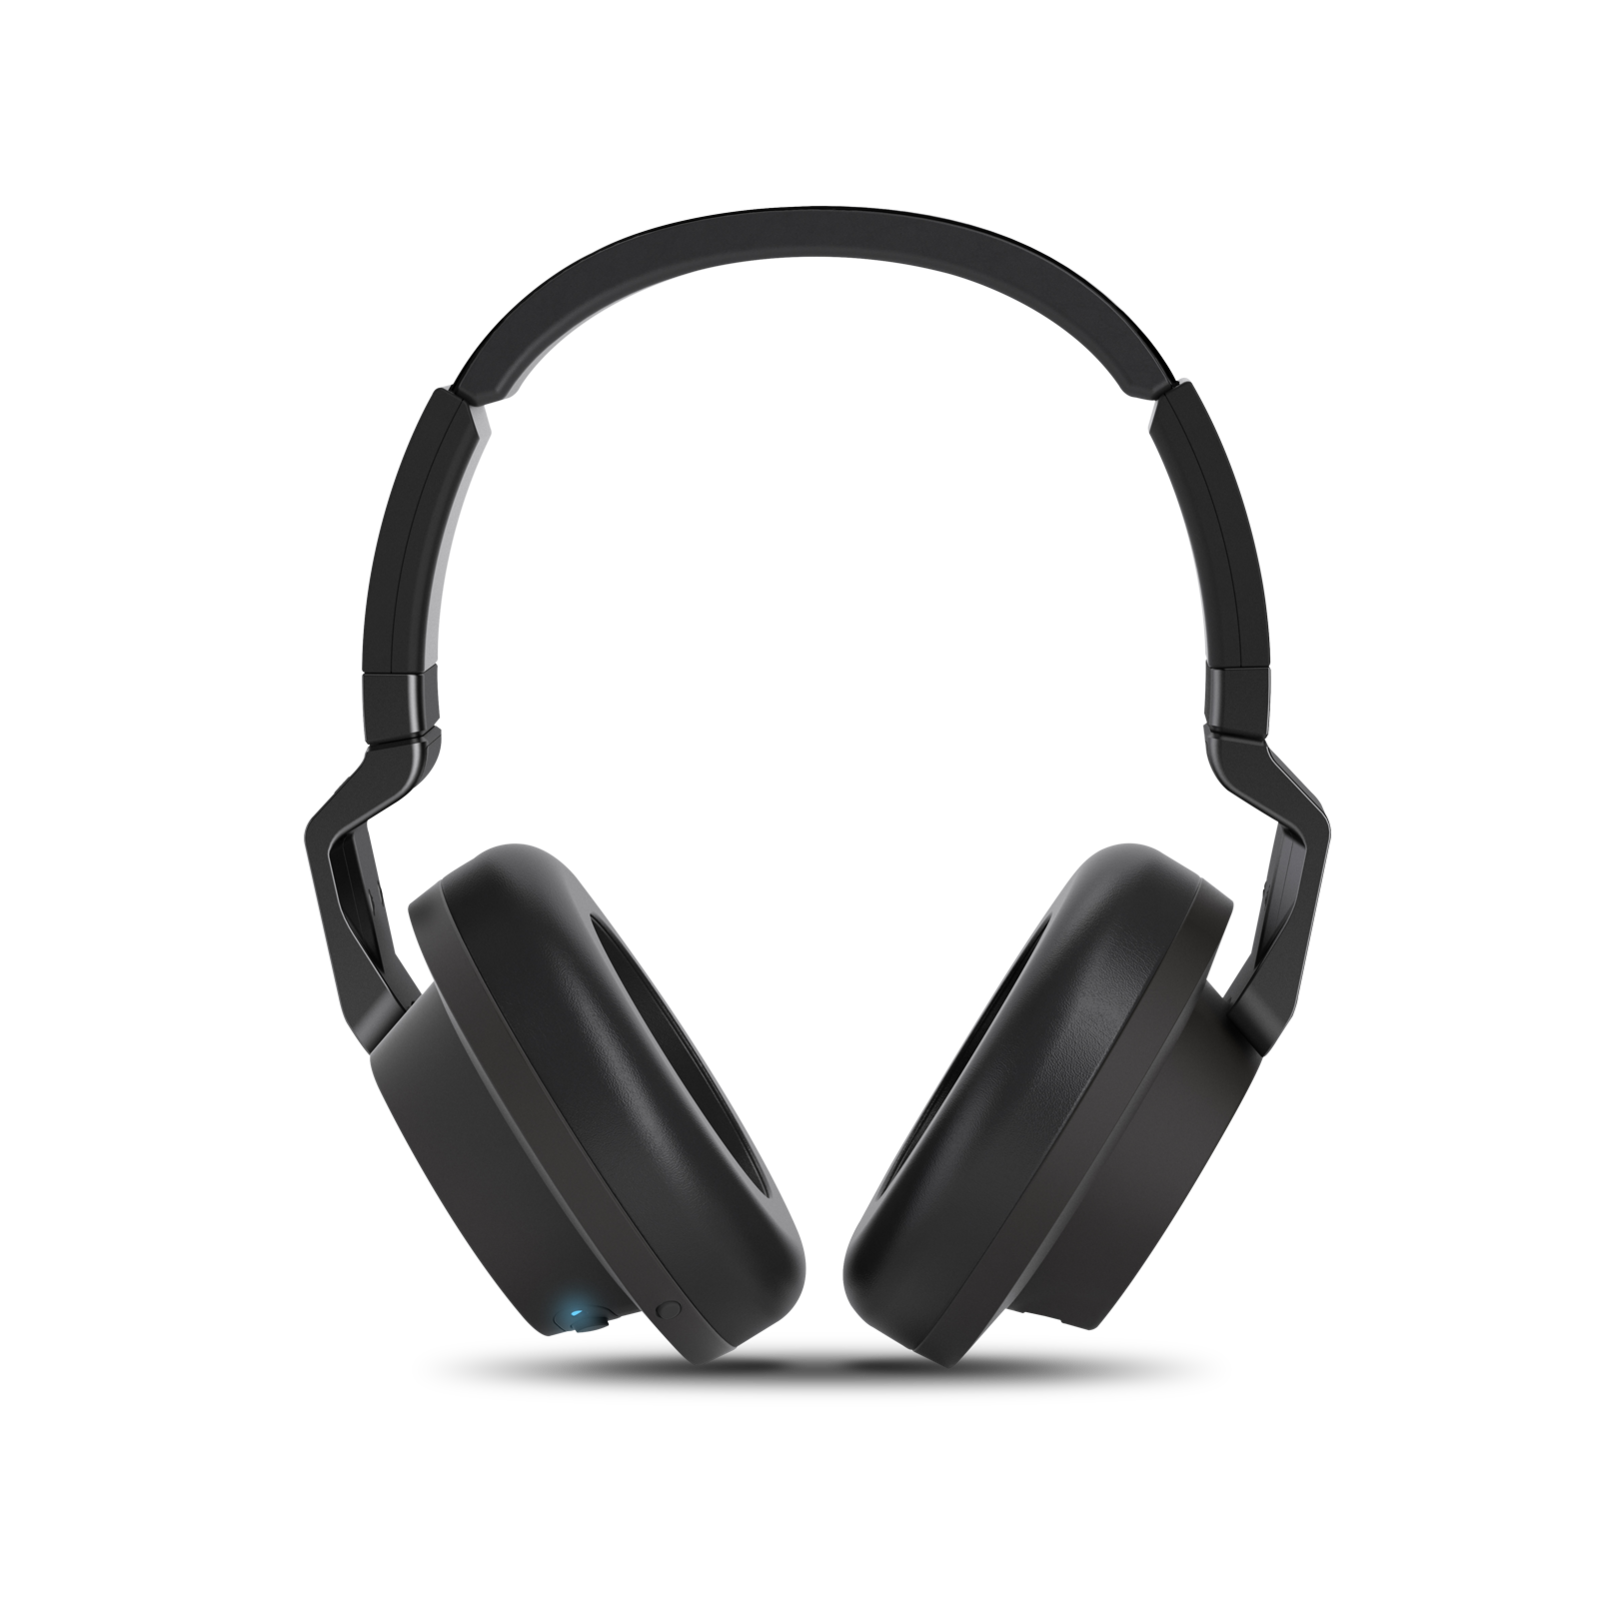 K 845BT - Black - High performance over-ear wireless headphones with Bluetooth - Front